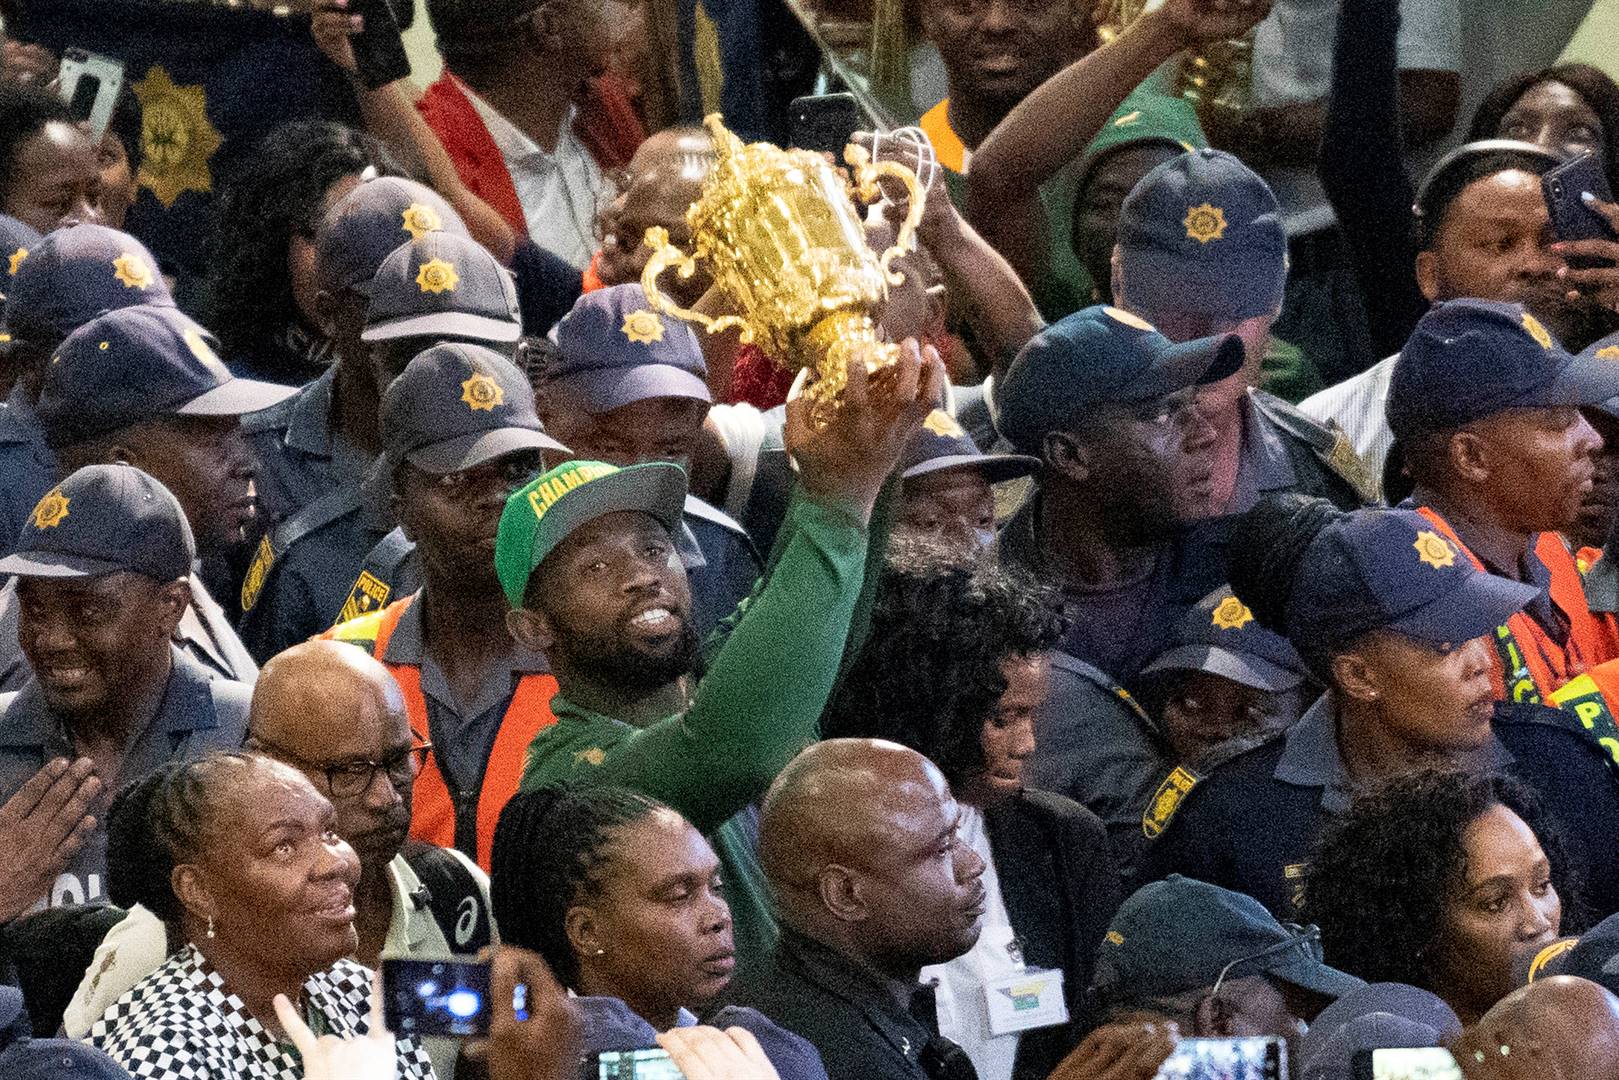 Siya Kolisi holds the Webb Ellis Cup as he is greeted by hundreds of fans upon his arrival at Johannesburg’s OR Tambo airport on Tuesday. South Africa defeated England 32-12 in the Rugby World Cup final on Saturday Picture: Jerome Delay/AP